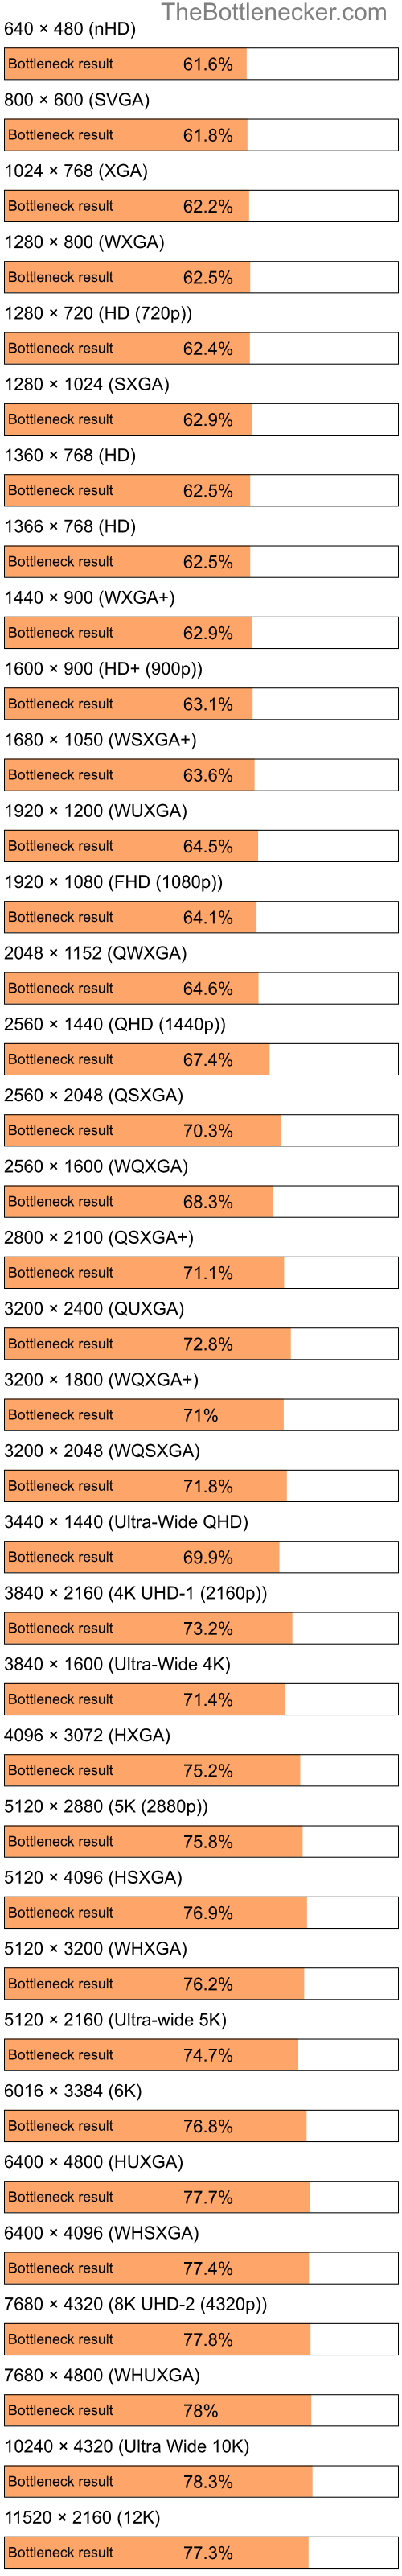 Bottleneck results by resolution for Intel Pentium 4 and AMD Mobility Radeon X1600 in7 Days to Die